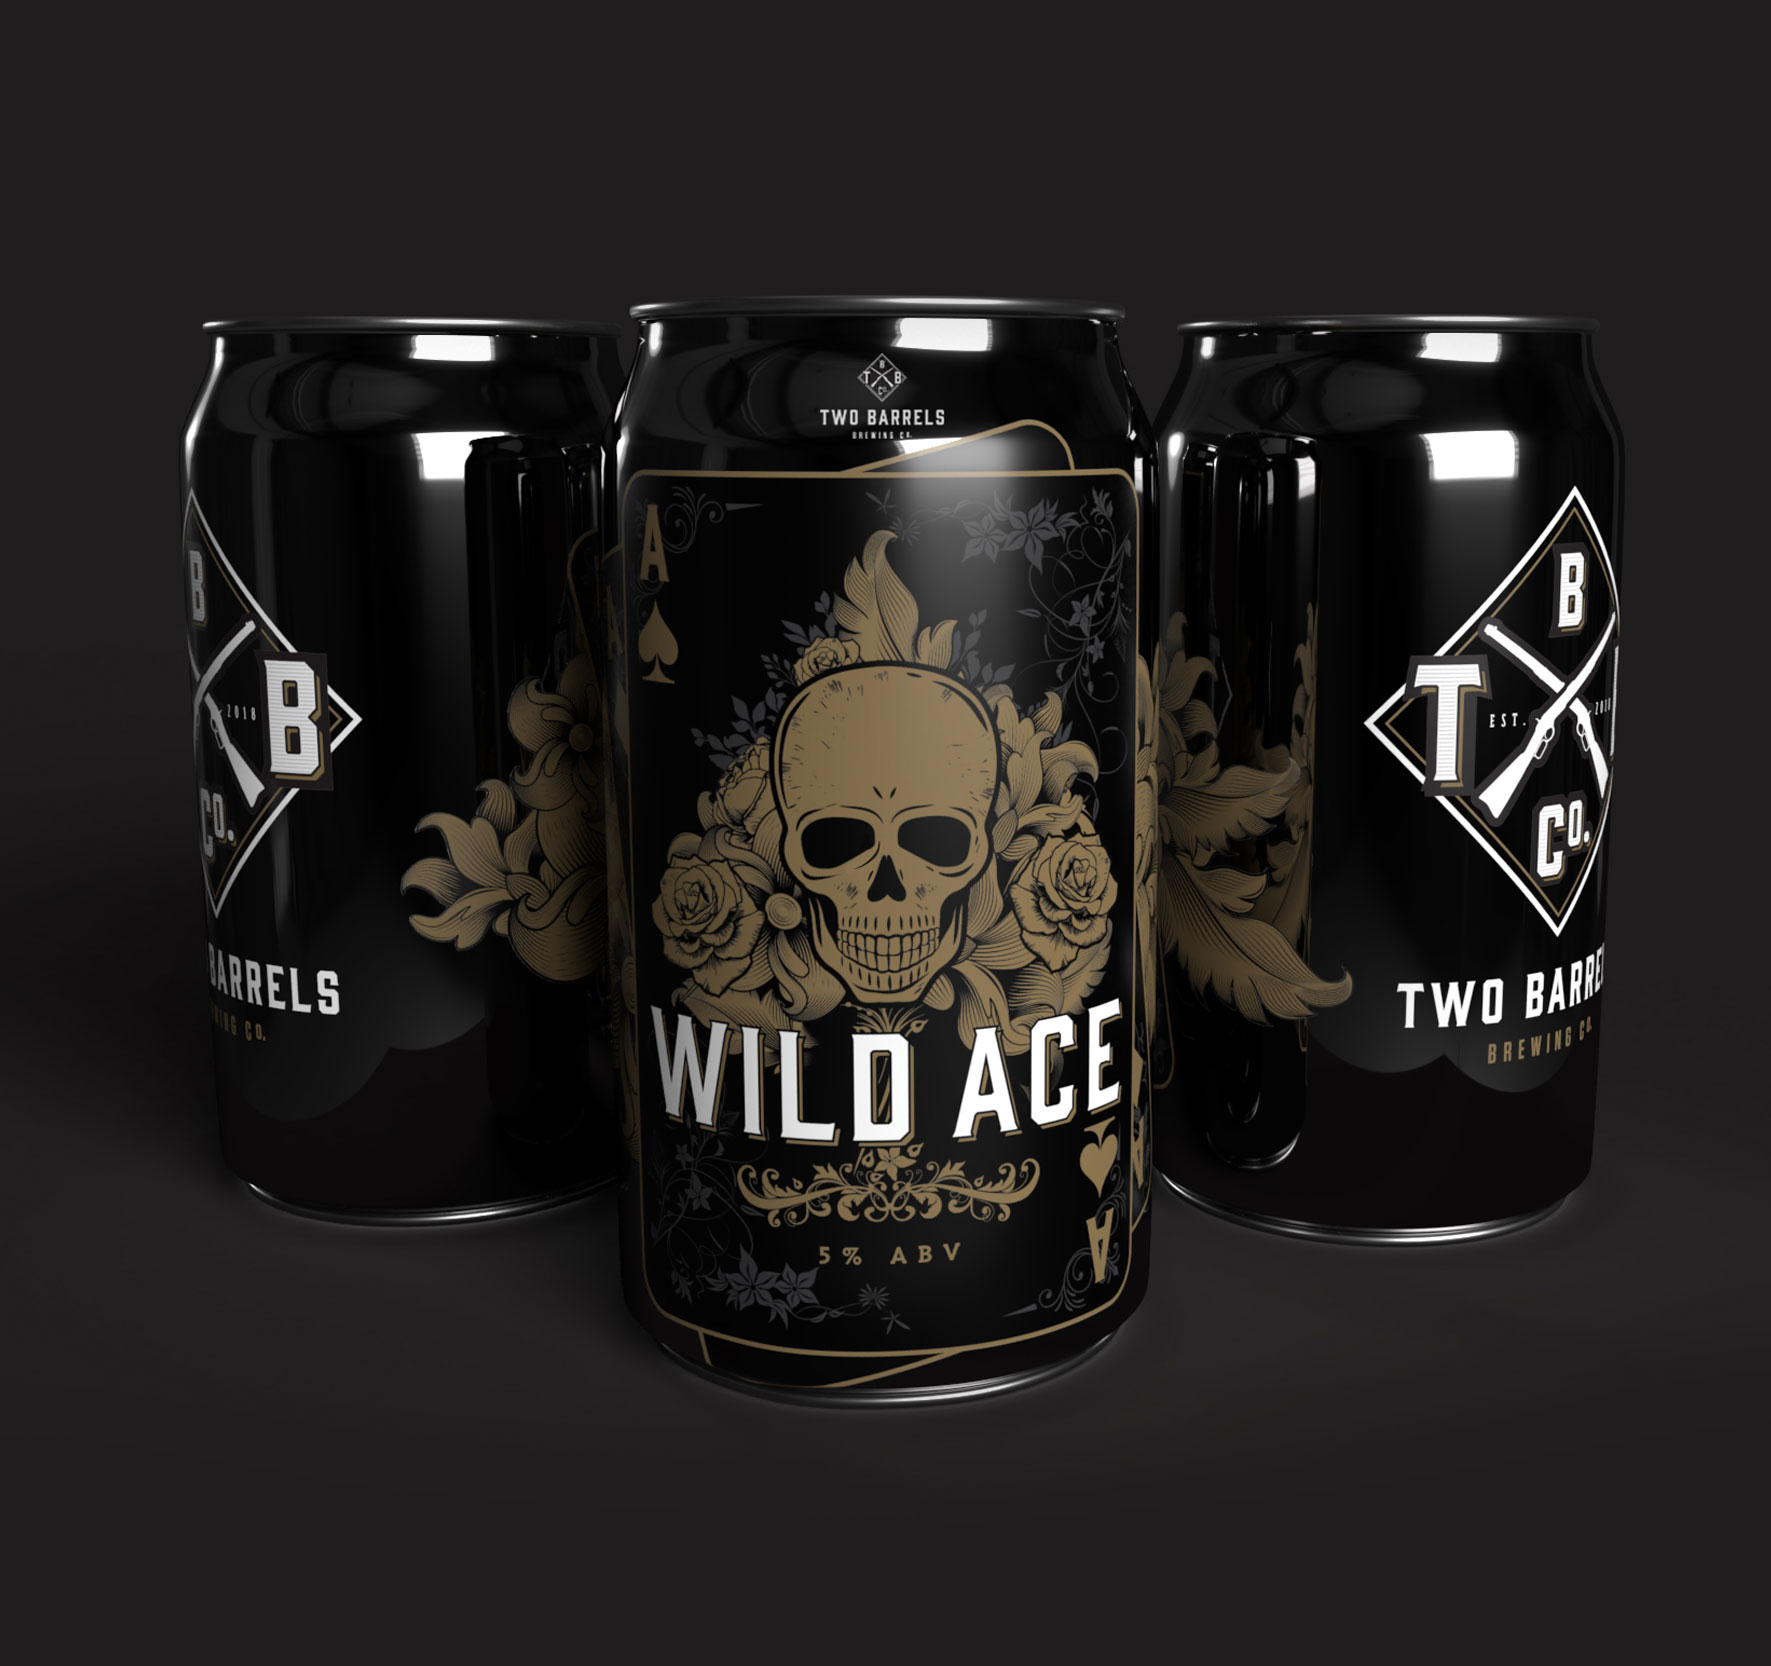 Two Barrels Wild Ace Craft Beer cans